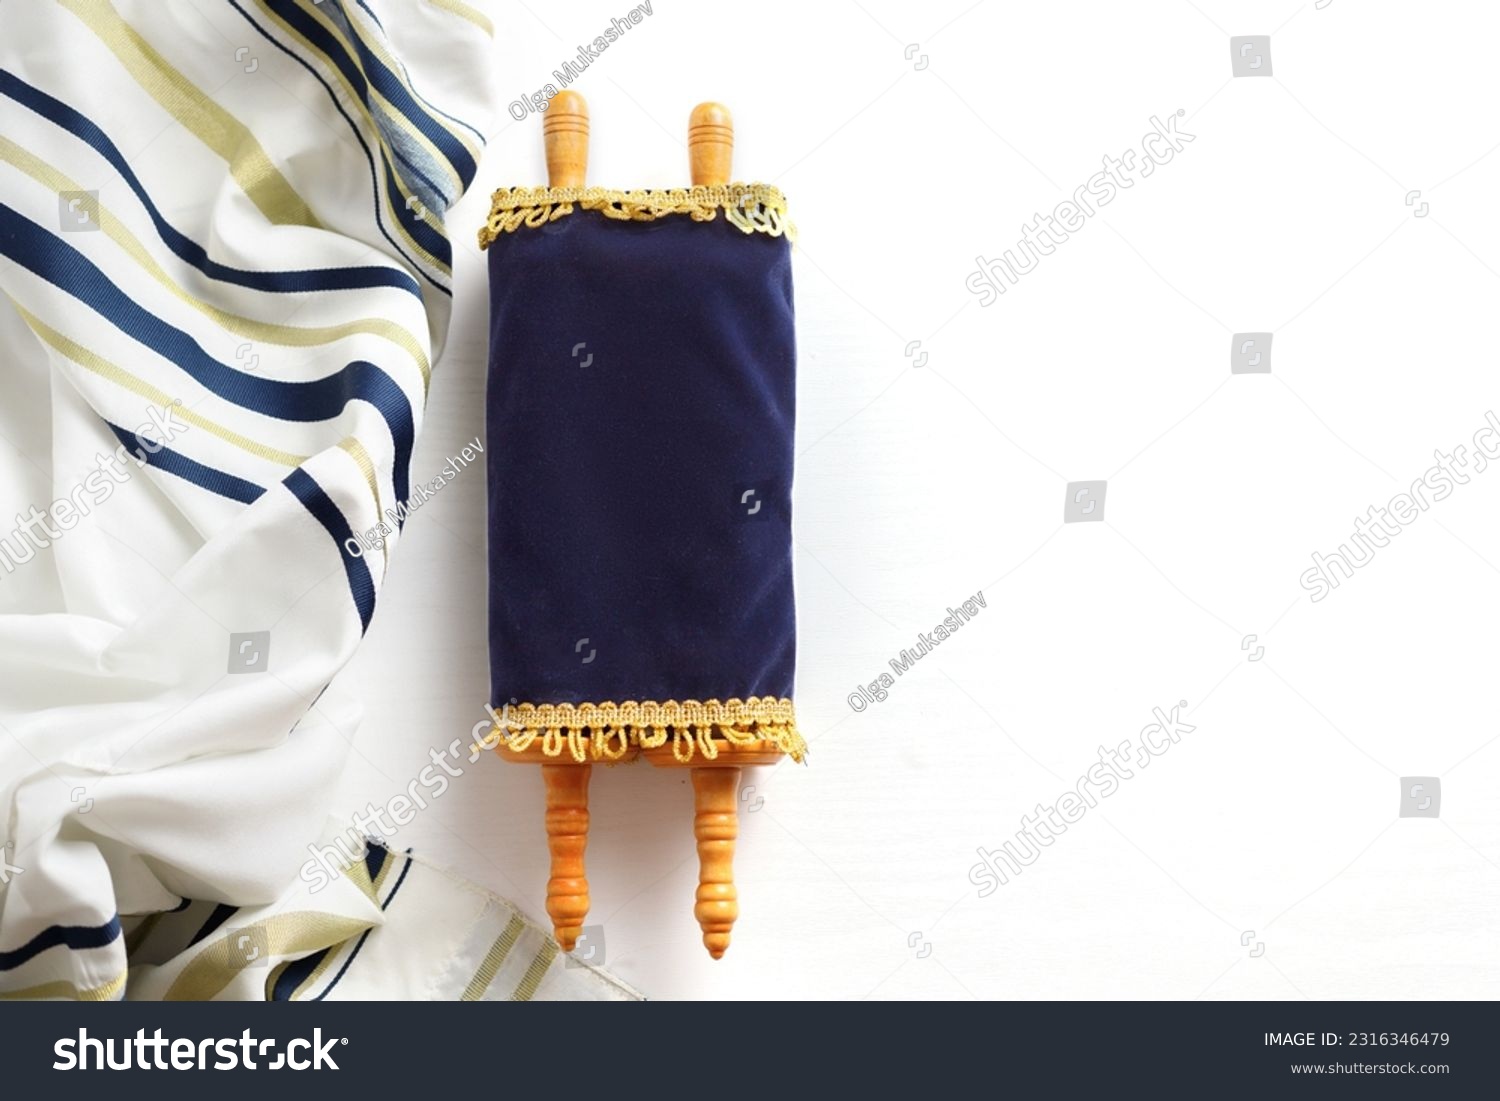 Torah scroll with Tallit on a light background #2316346479